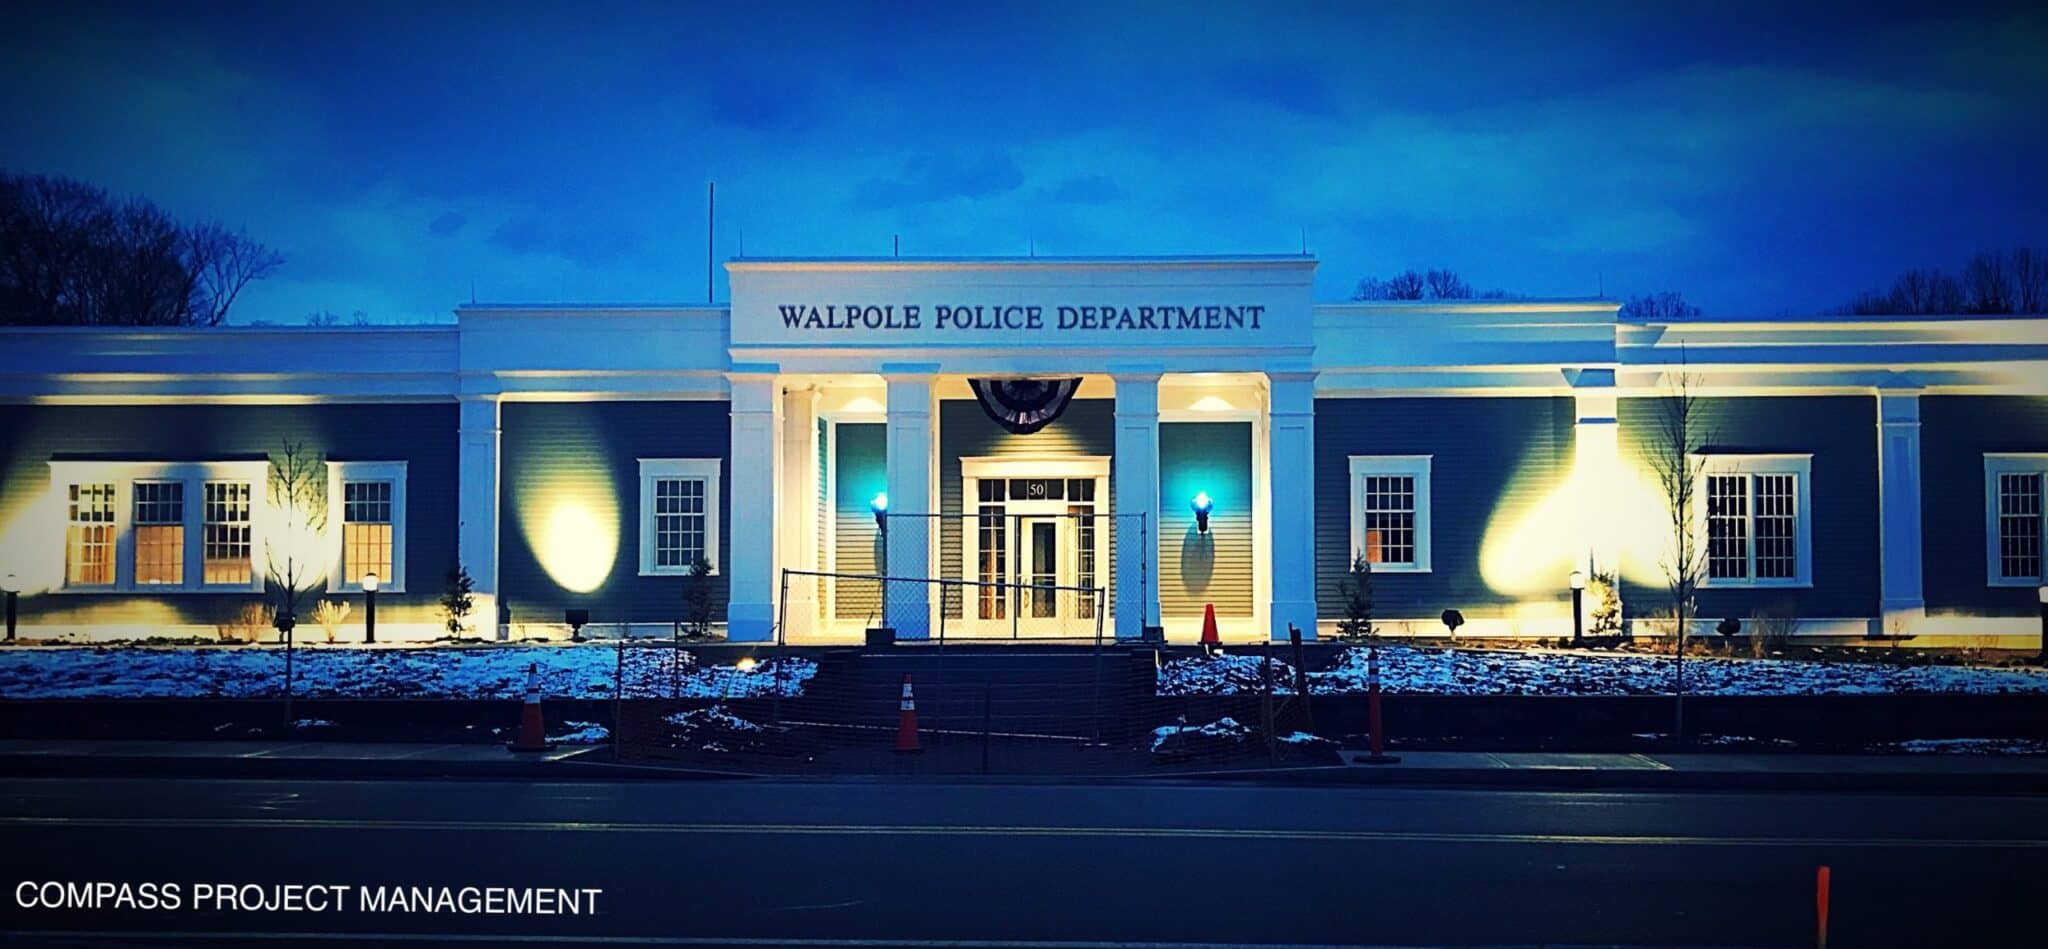 Image of Town of Walpole Police Department